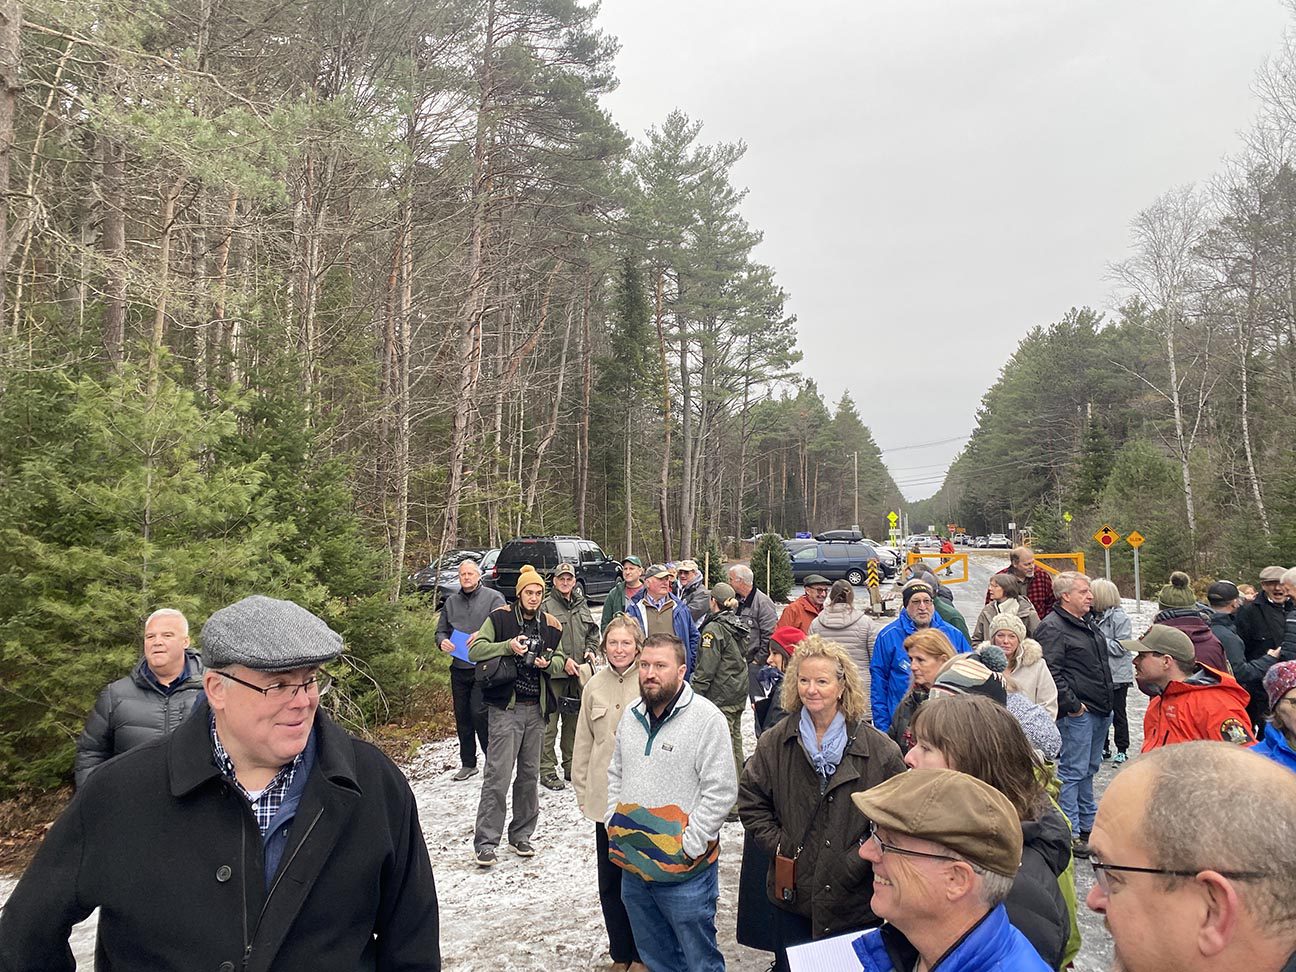 Several dozen people gathered for the opening Friday near Saranac Lake. Photo by Mike Lynch